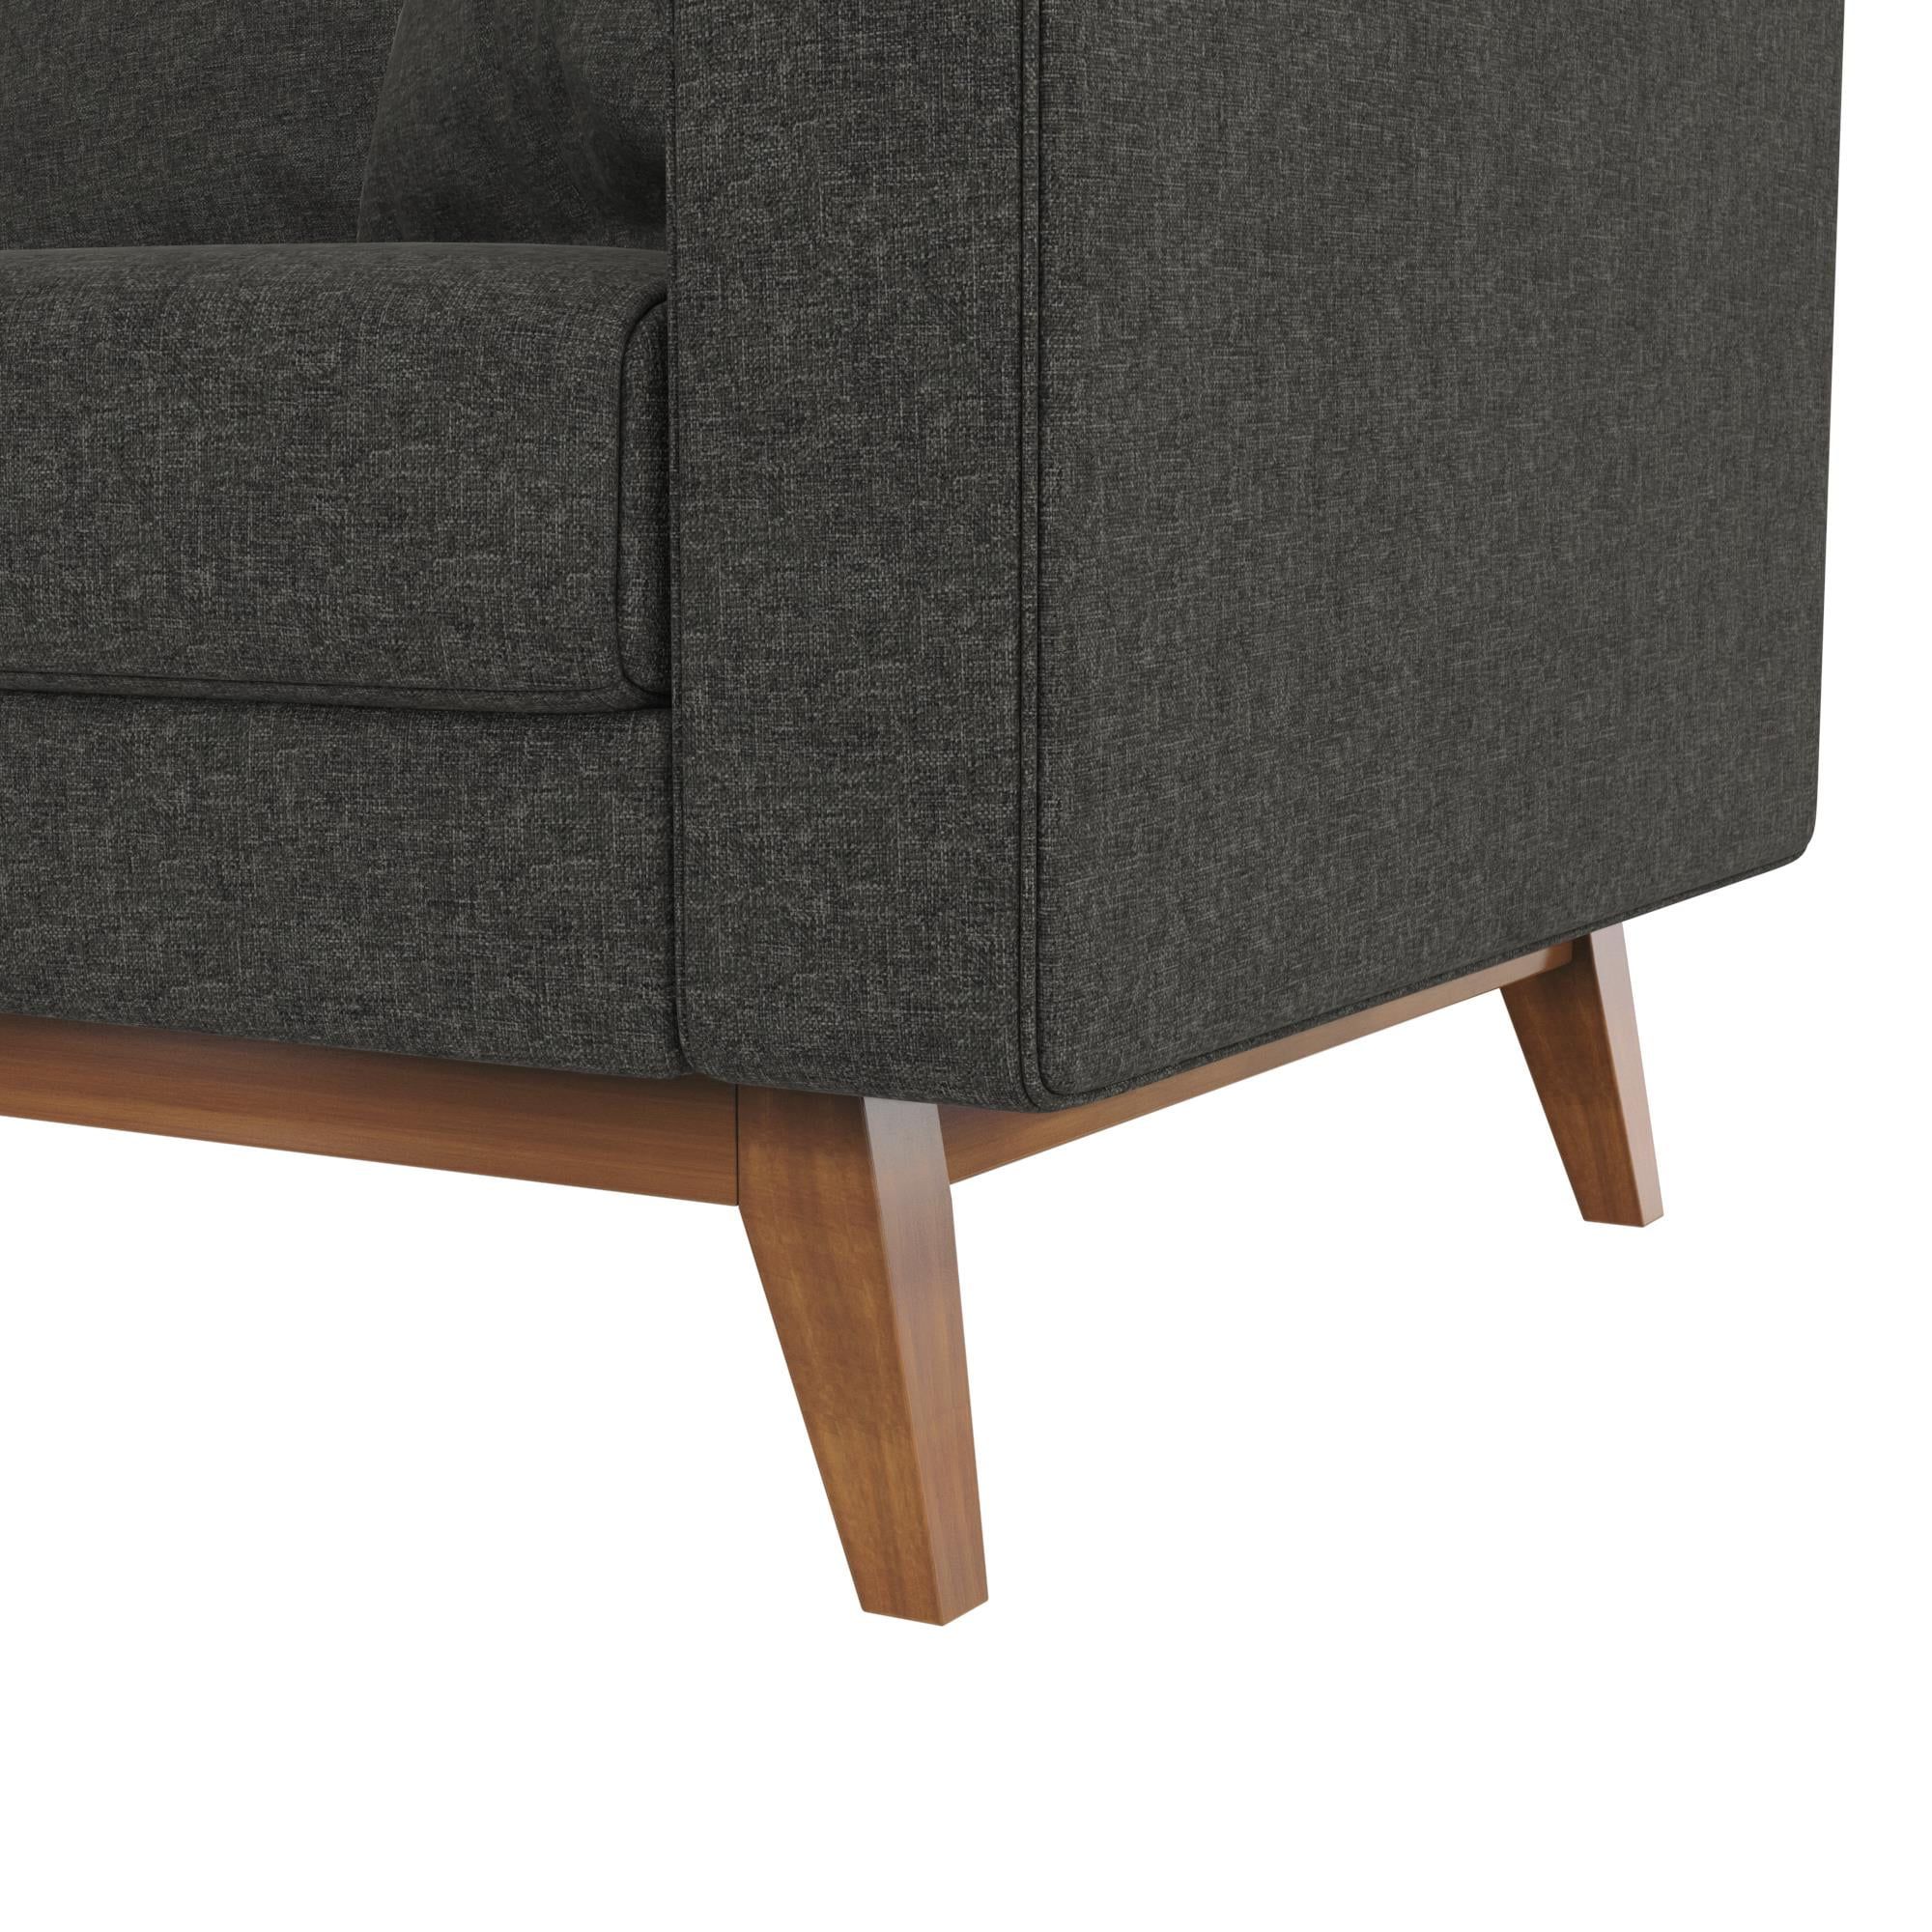 Dhp Miriam Pillowback Wood Base Sofa, Gray Linen – Walmart With Regard To Preferred Sofas With Pillowback Wood Bases (View 14 of 15)